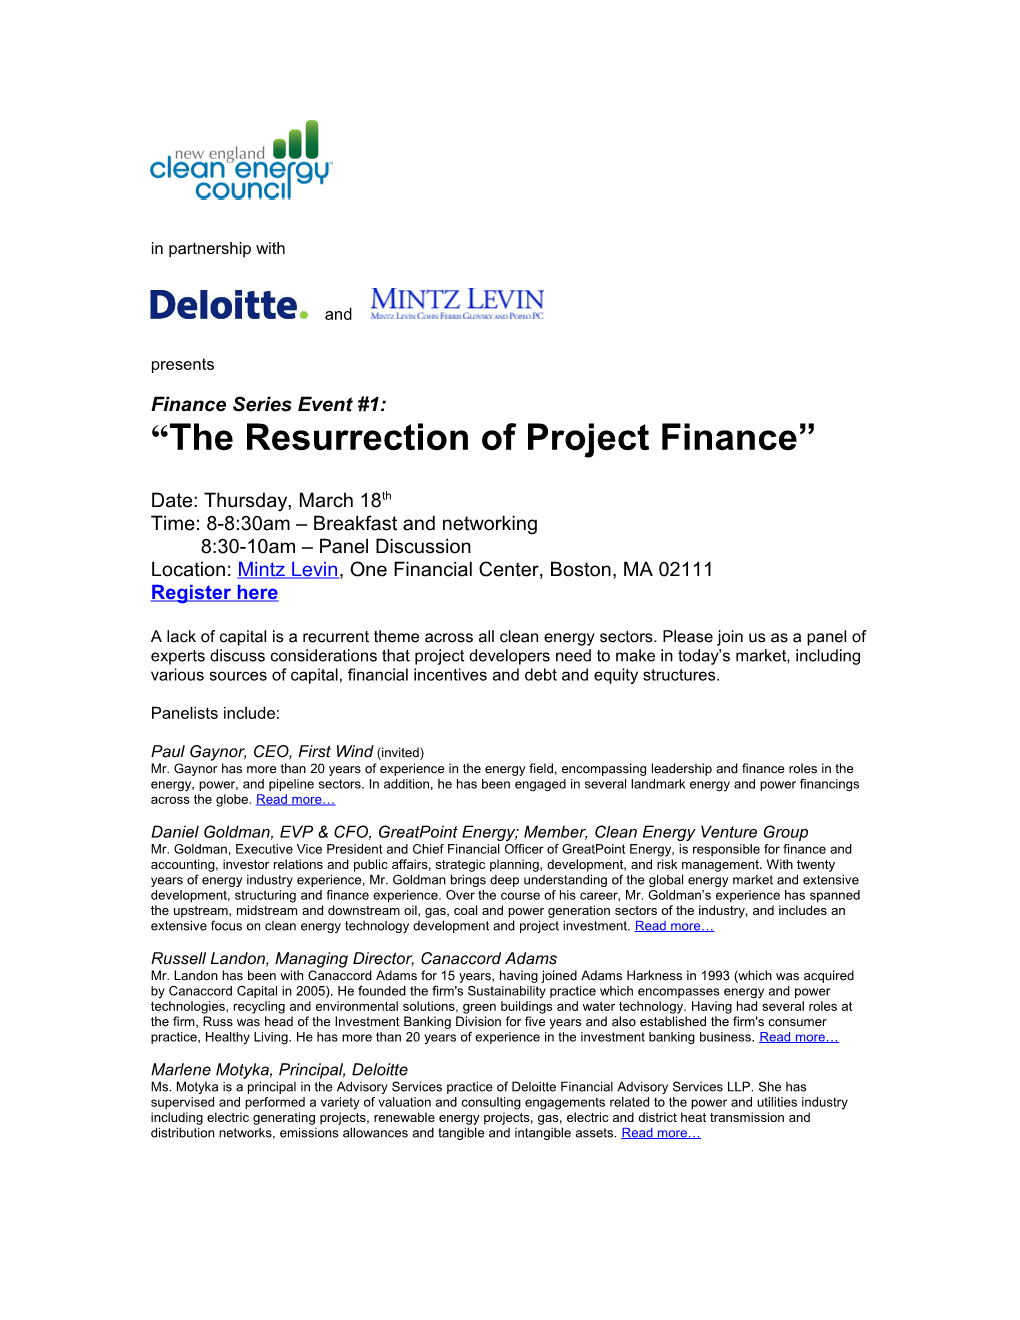 The Resurrection of Project Finance